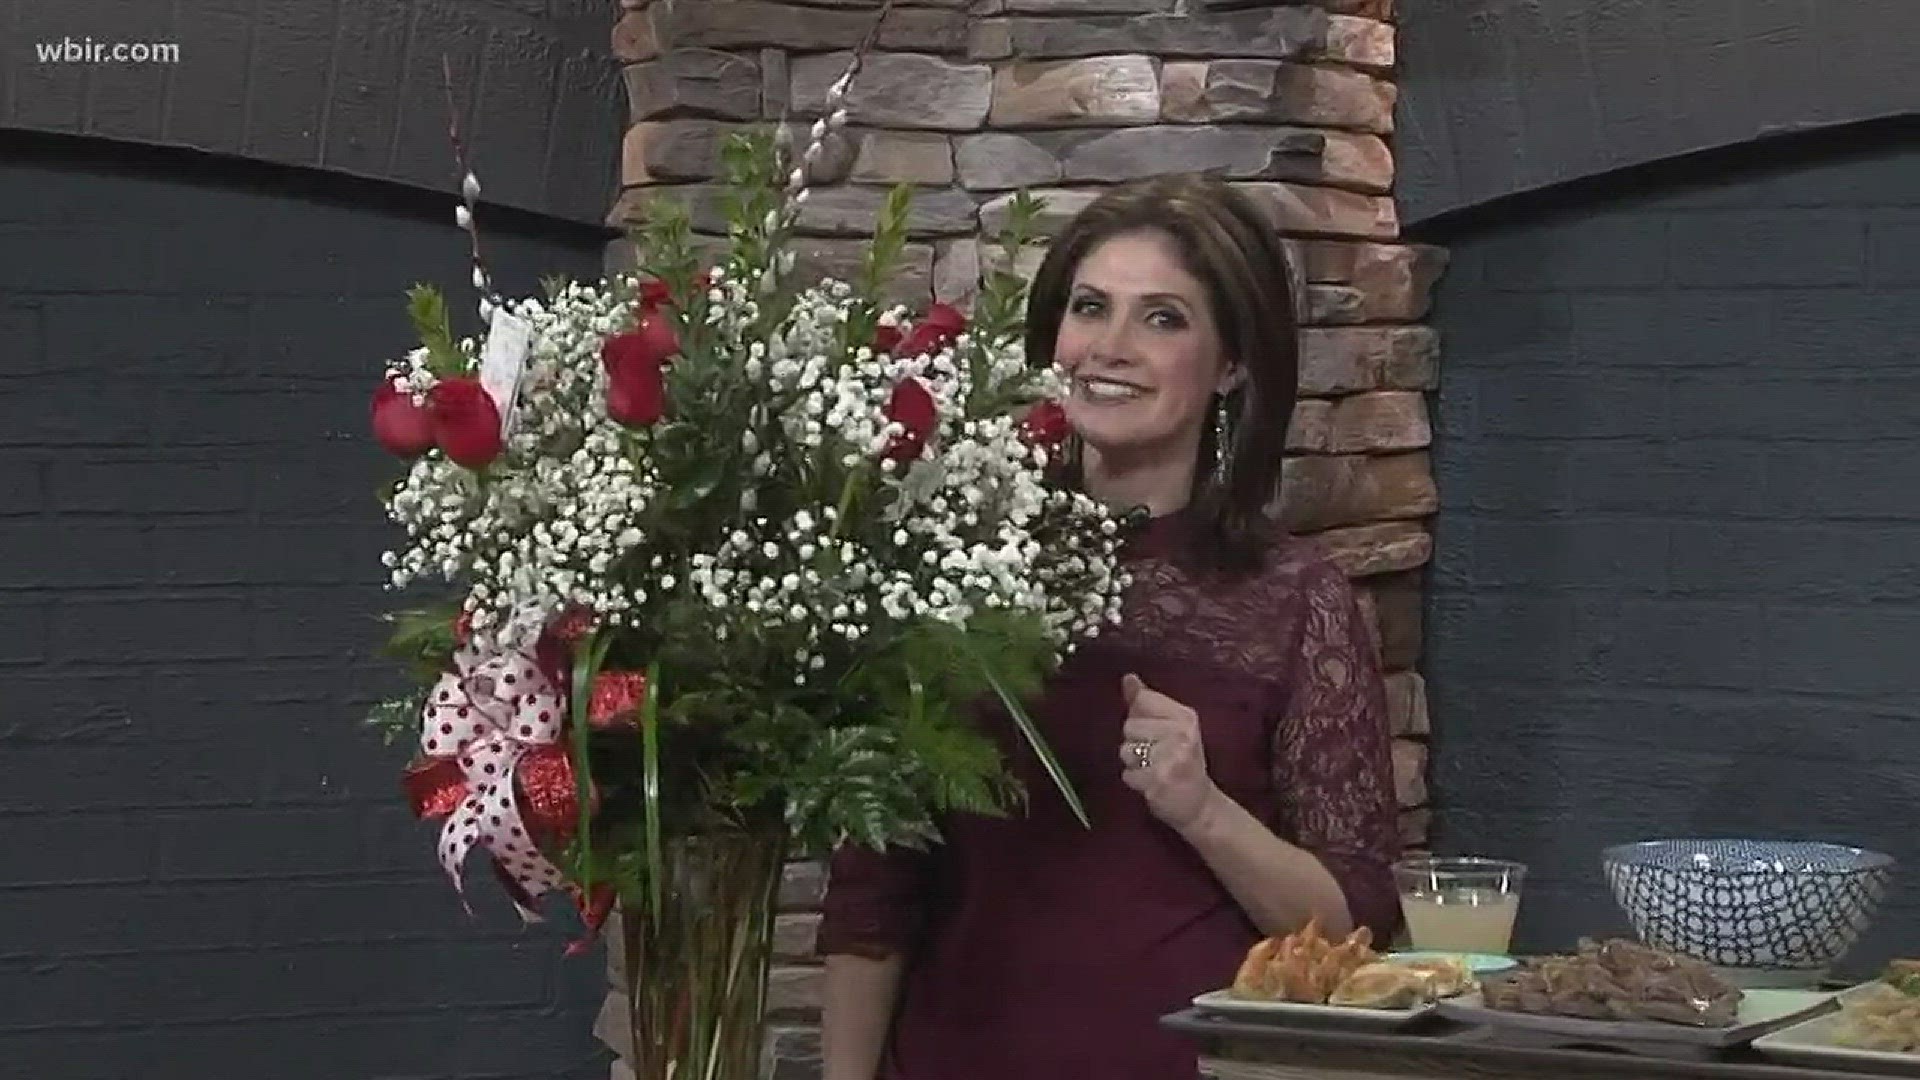 A moment when Beth gets a b'day surprise! Live at Five at Four 2-9-18